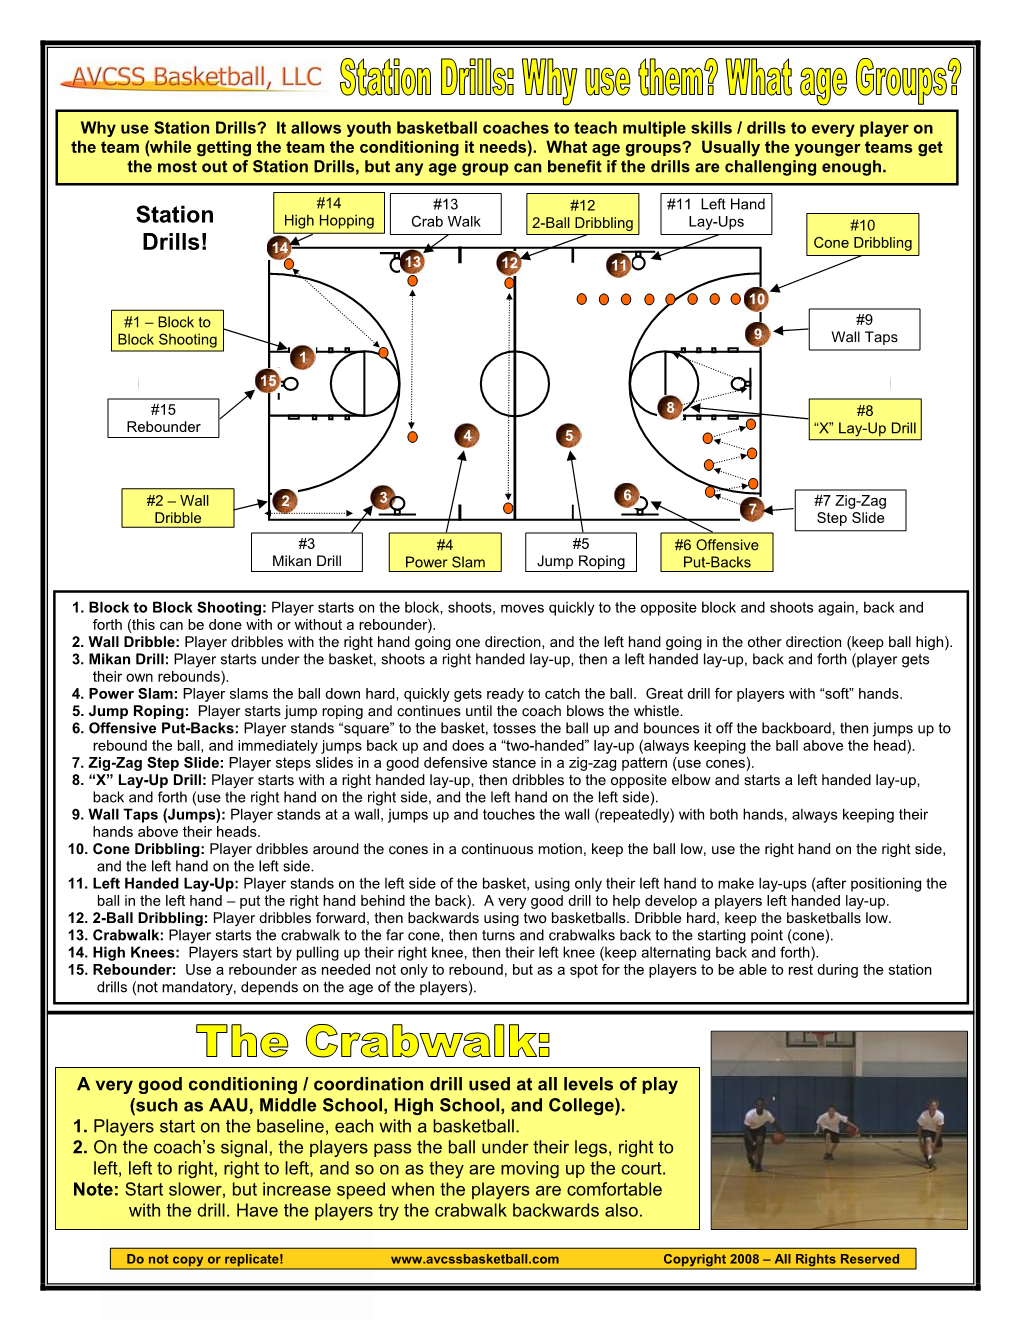 Station Drills for Youth Basketball